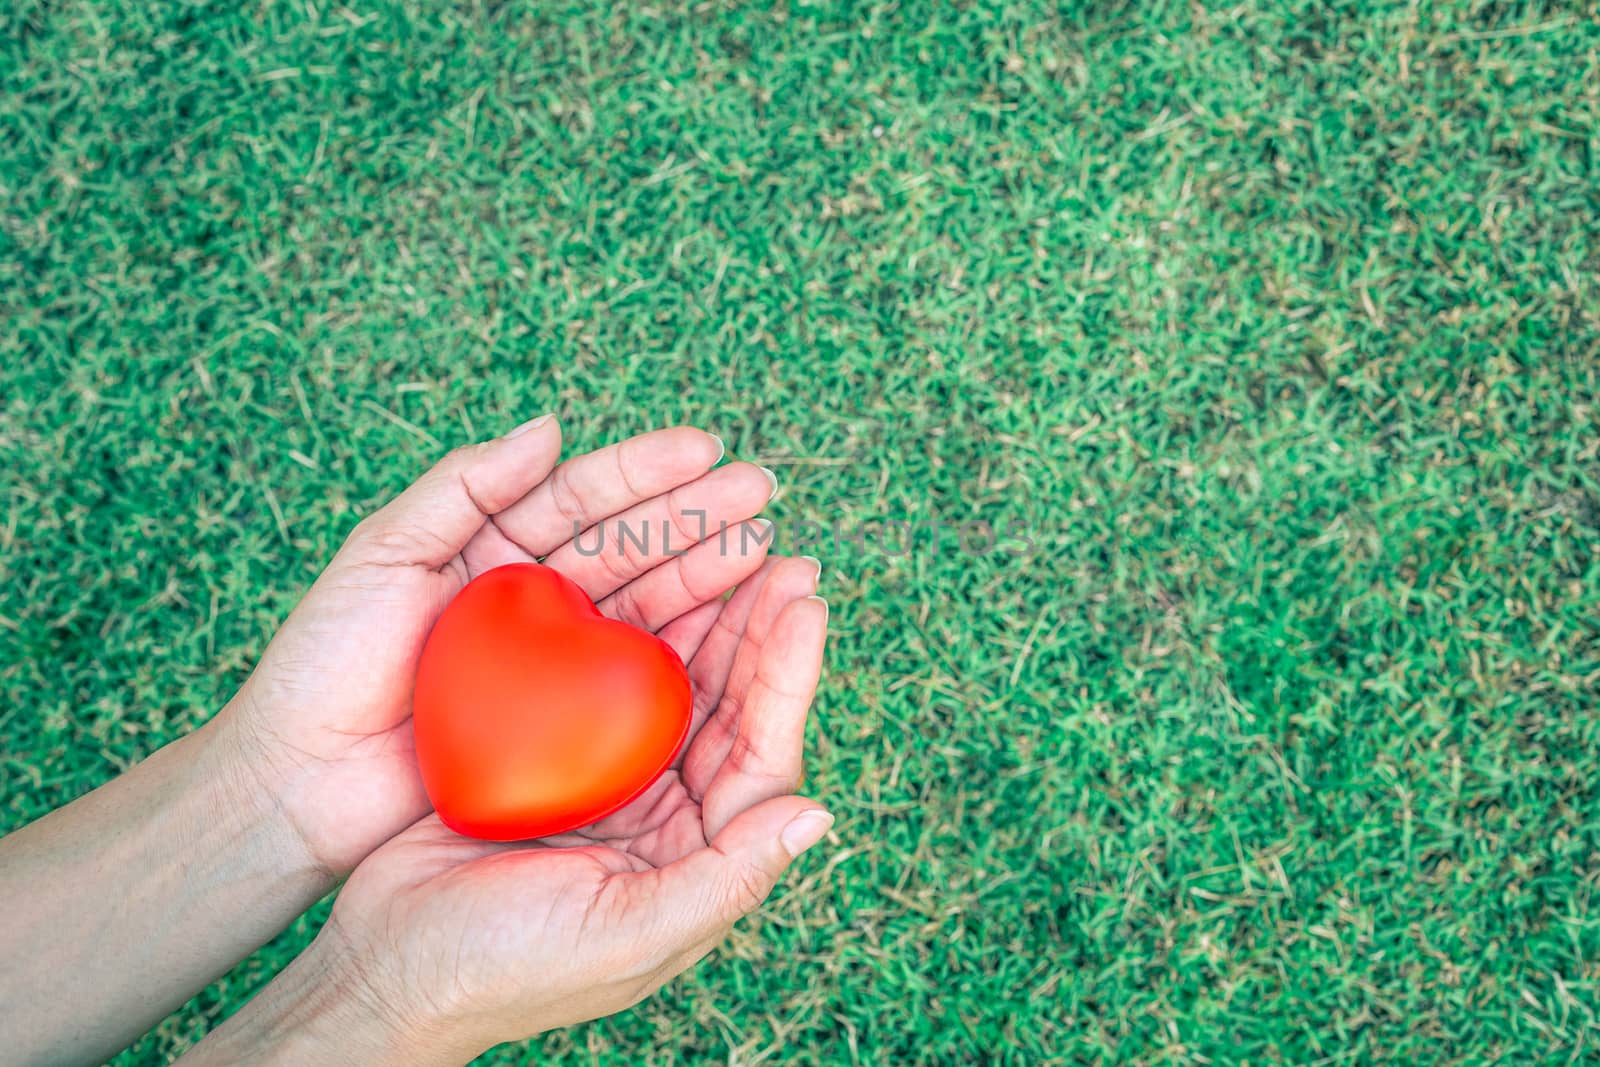 Red heart in the palm of the hand, in the background of a bright green grass garden detail art